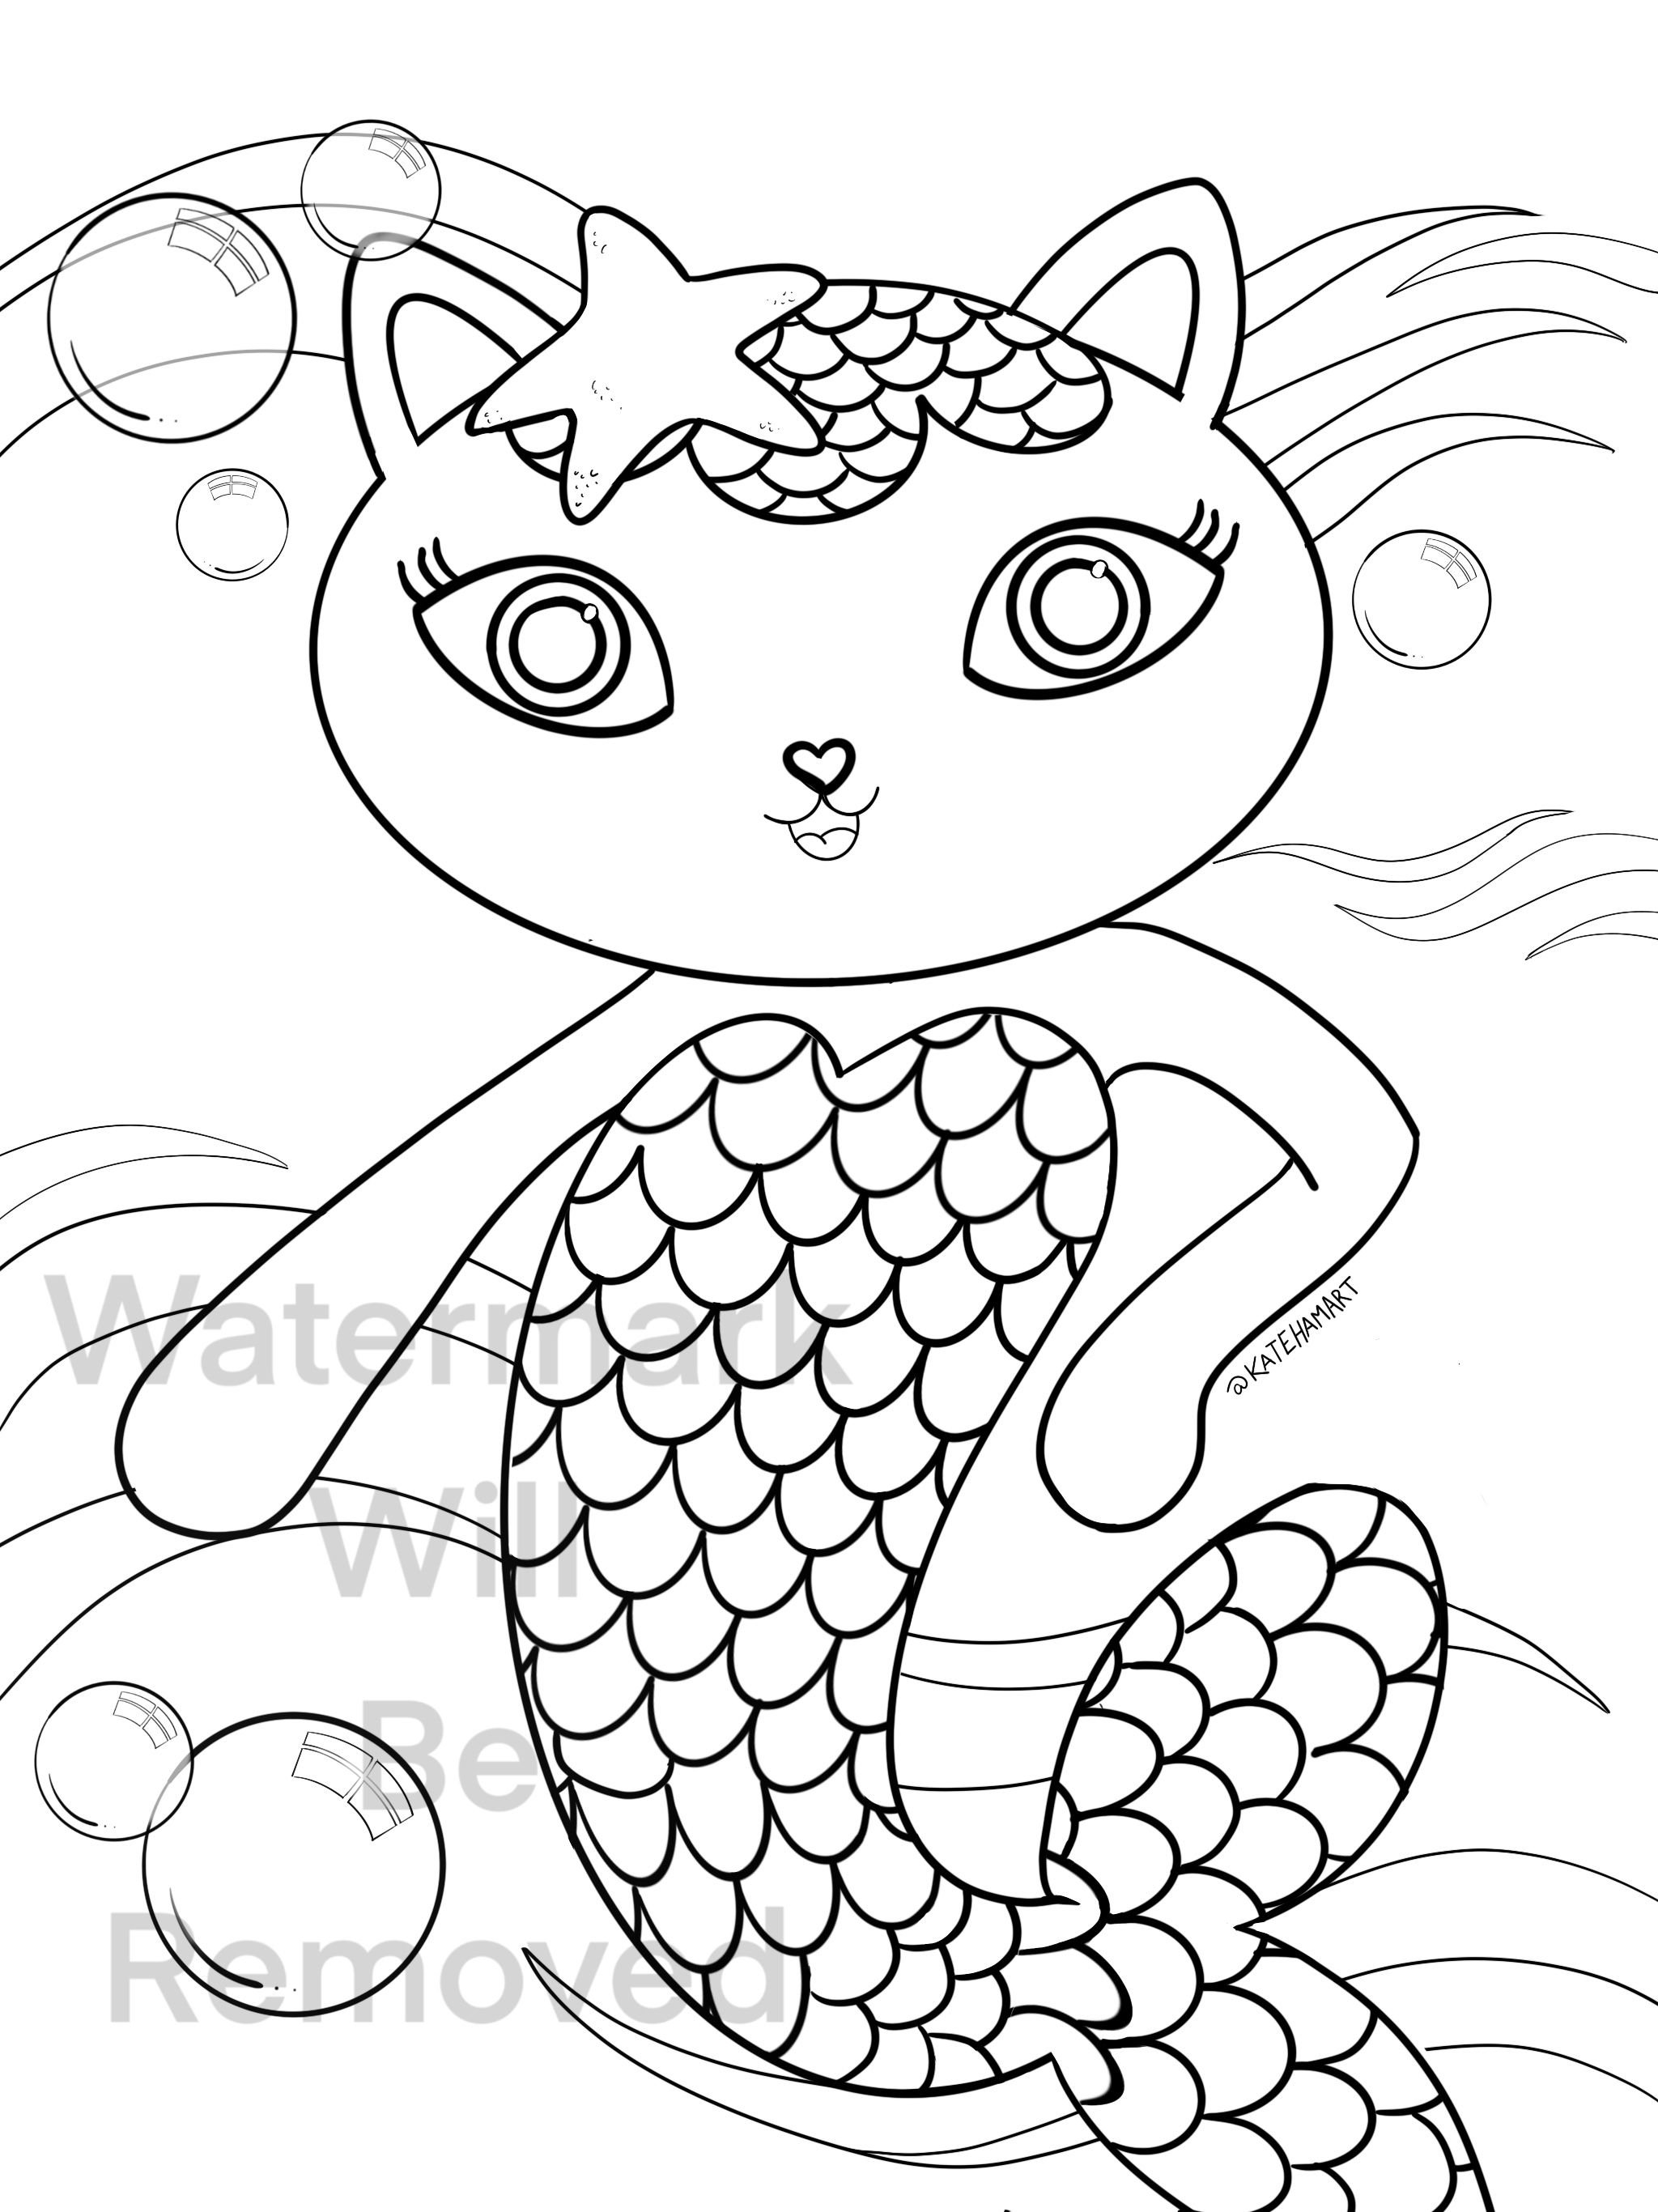 55  Coloring Pages Gabby's Dollhouse  Latest HD